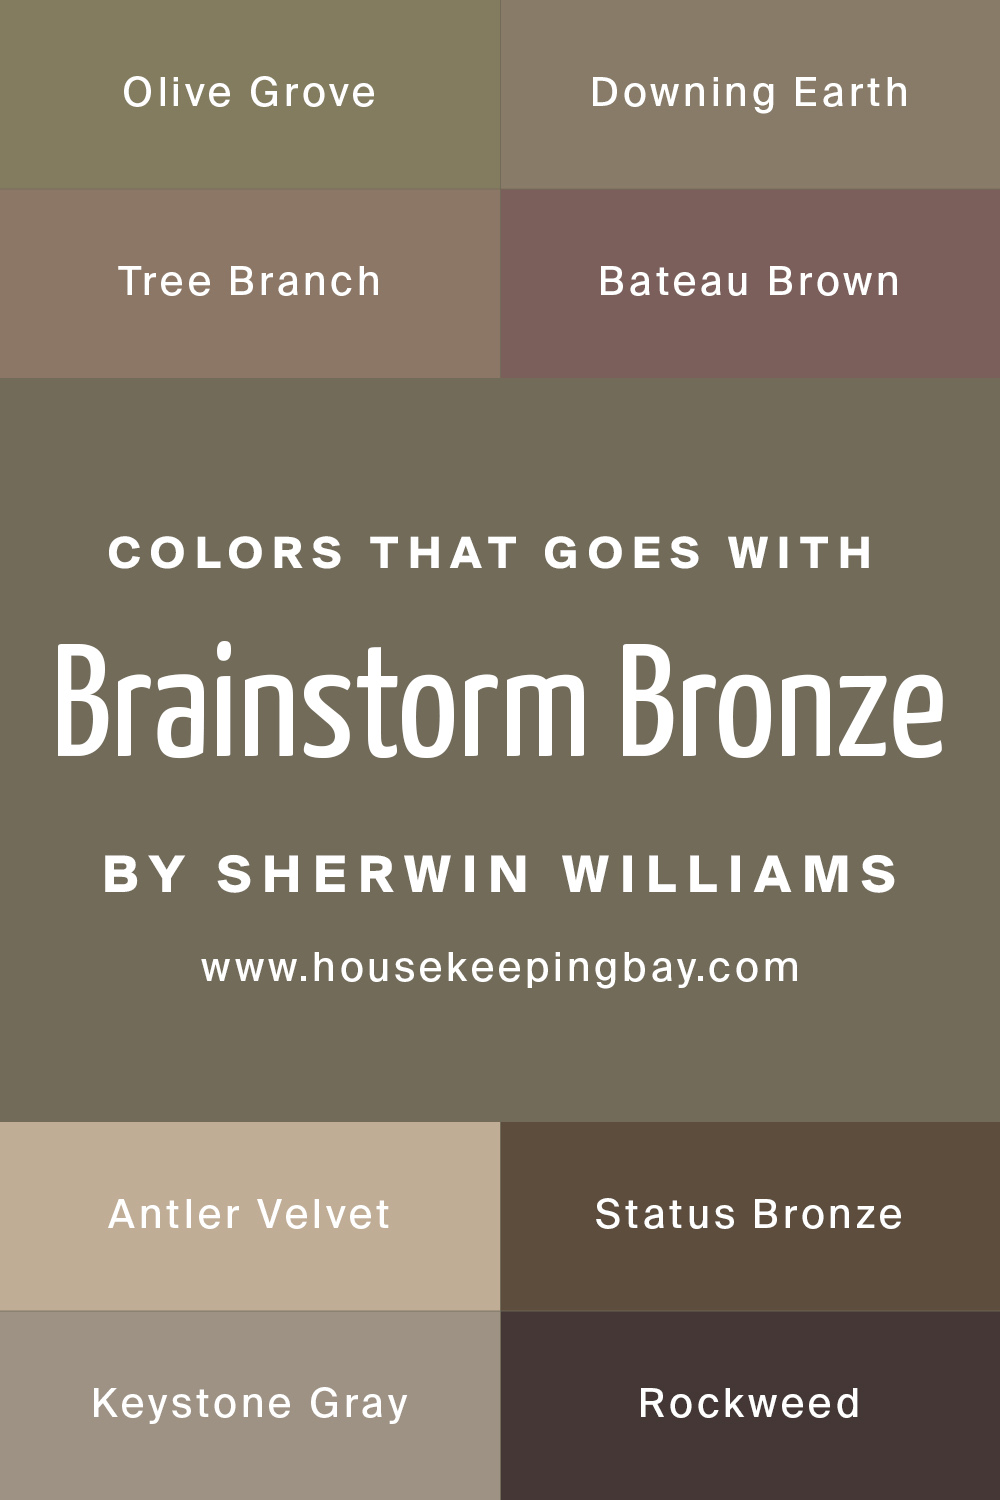 Colors that goes with Brainstorm Bronze